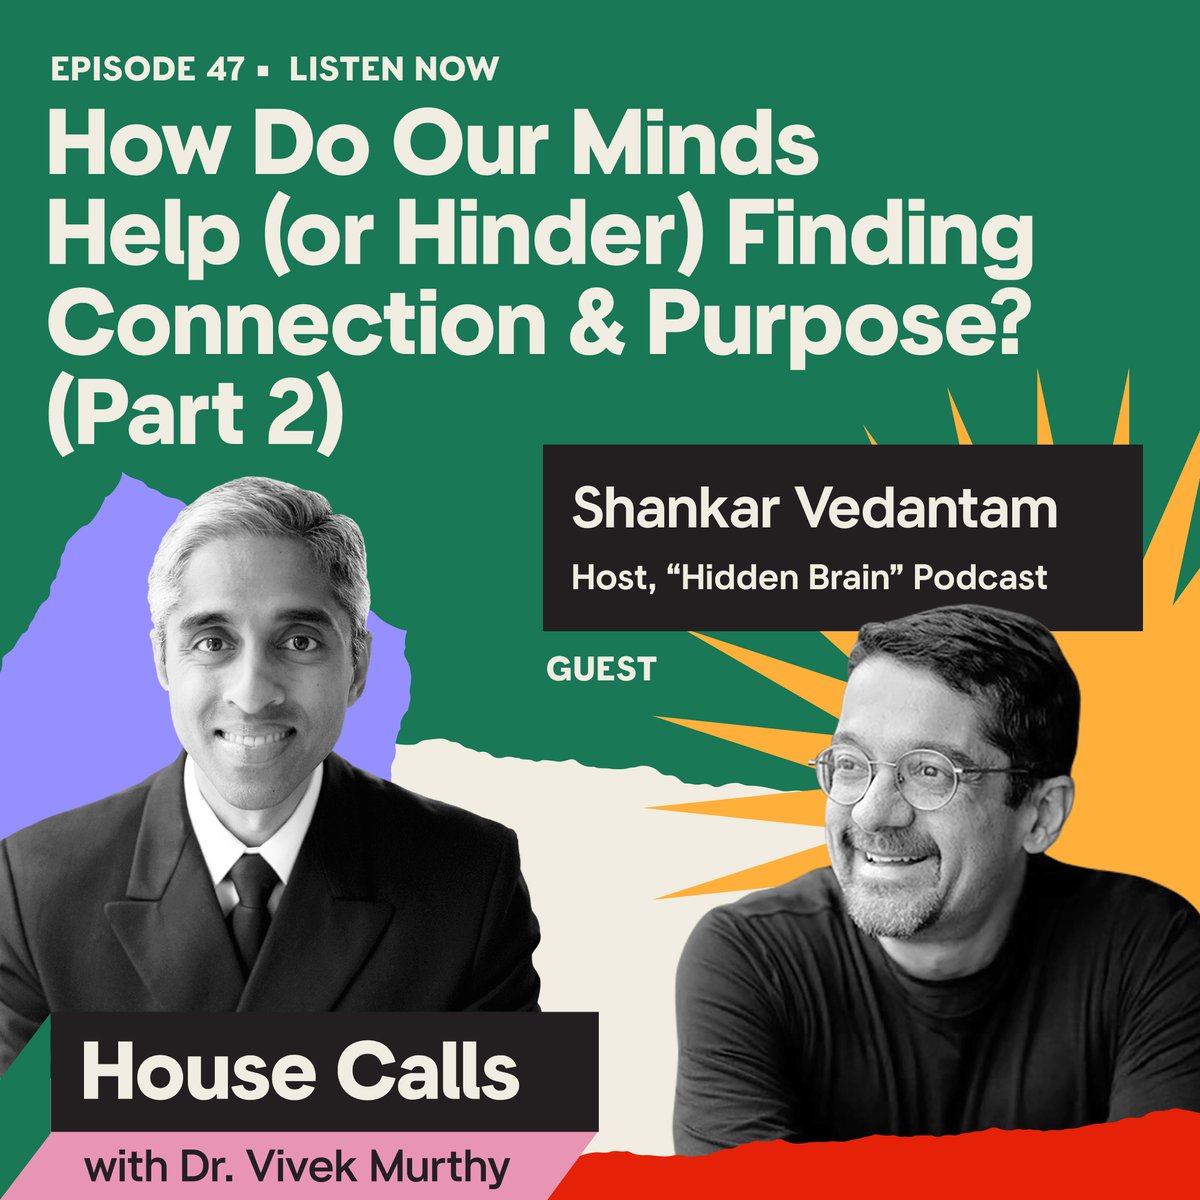 NEW: Do you know what differentiates purpose and goals? In part 2 of our conversation, @HiddenBrain host Shankar Vedantam talks about the difference between purpose and goals and how purpose is essential for our health. Listen today: bit.ly/4bnHRnJ